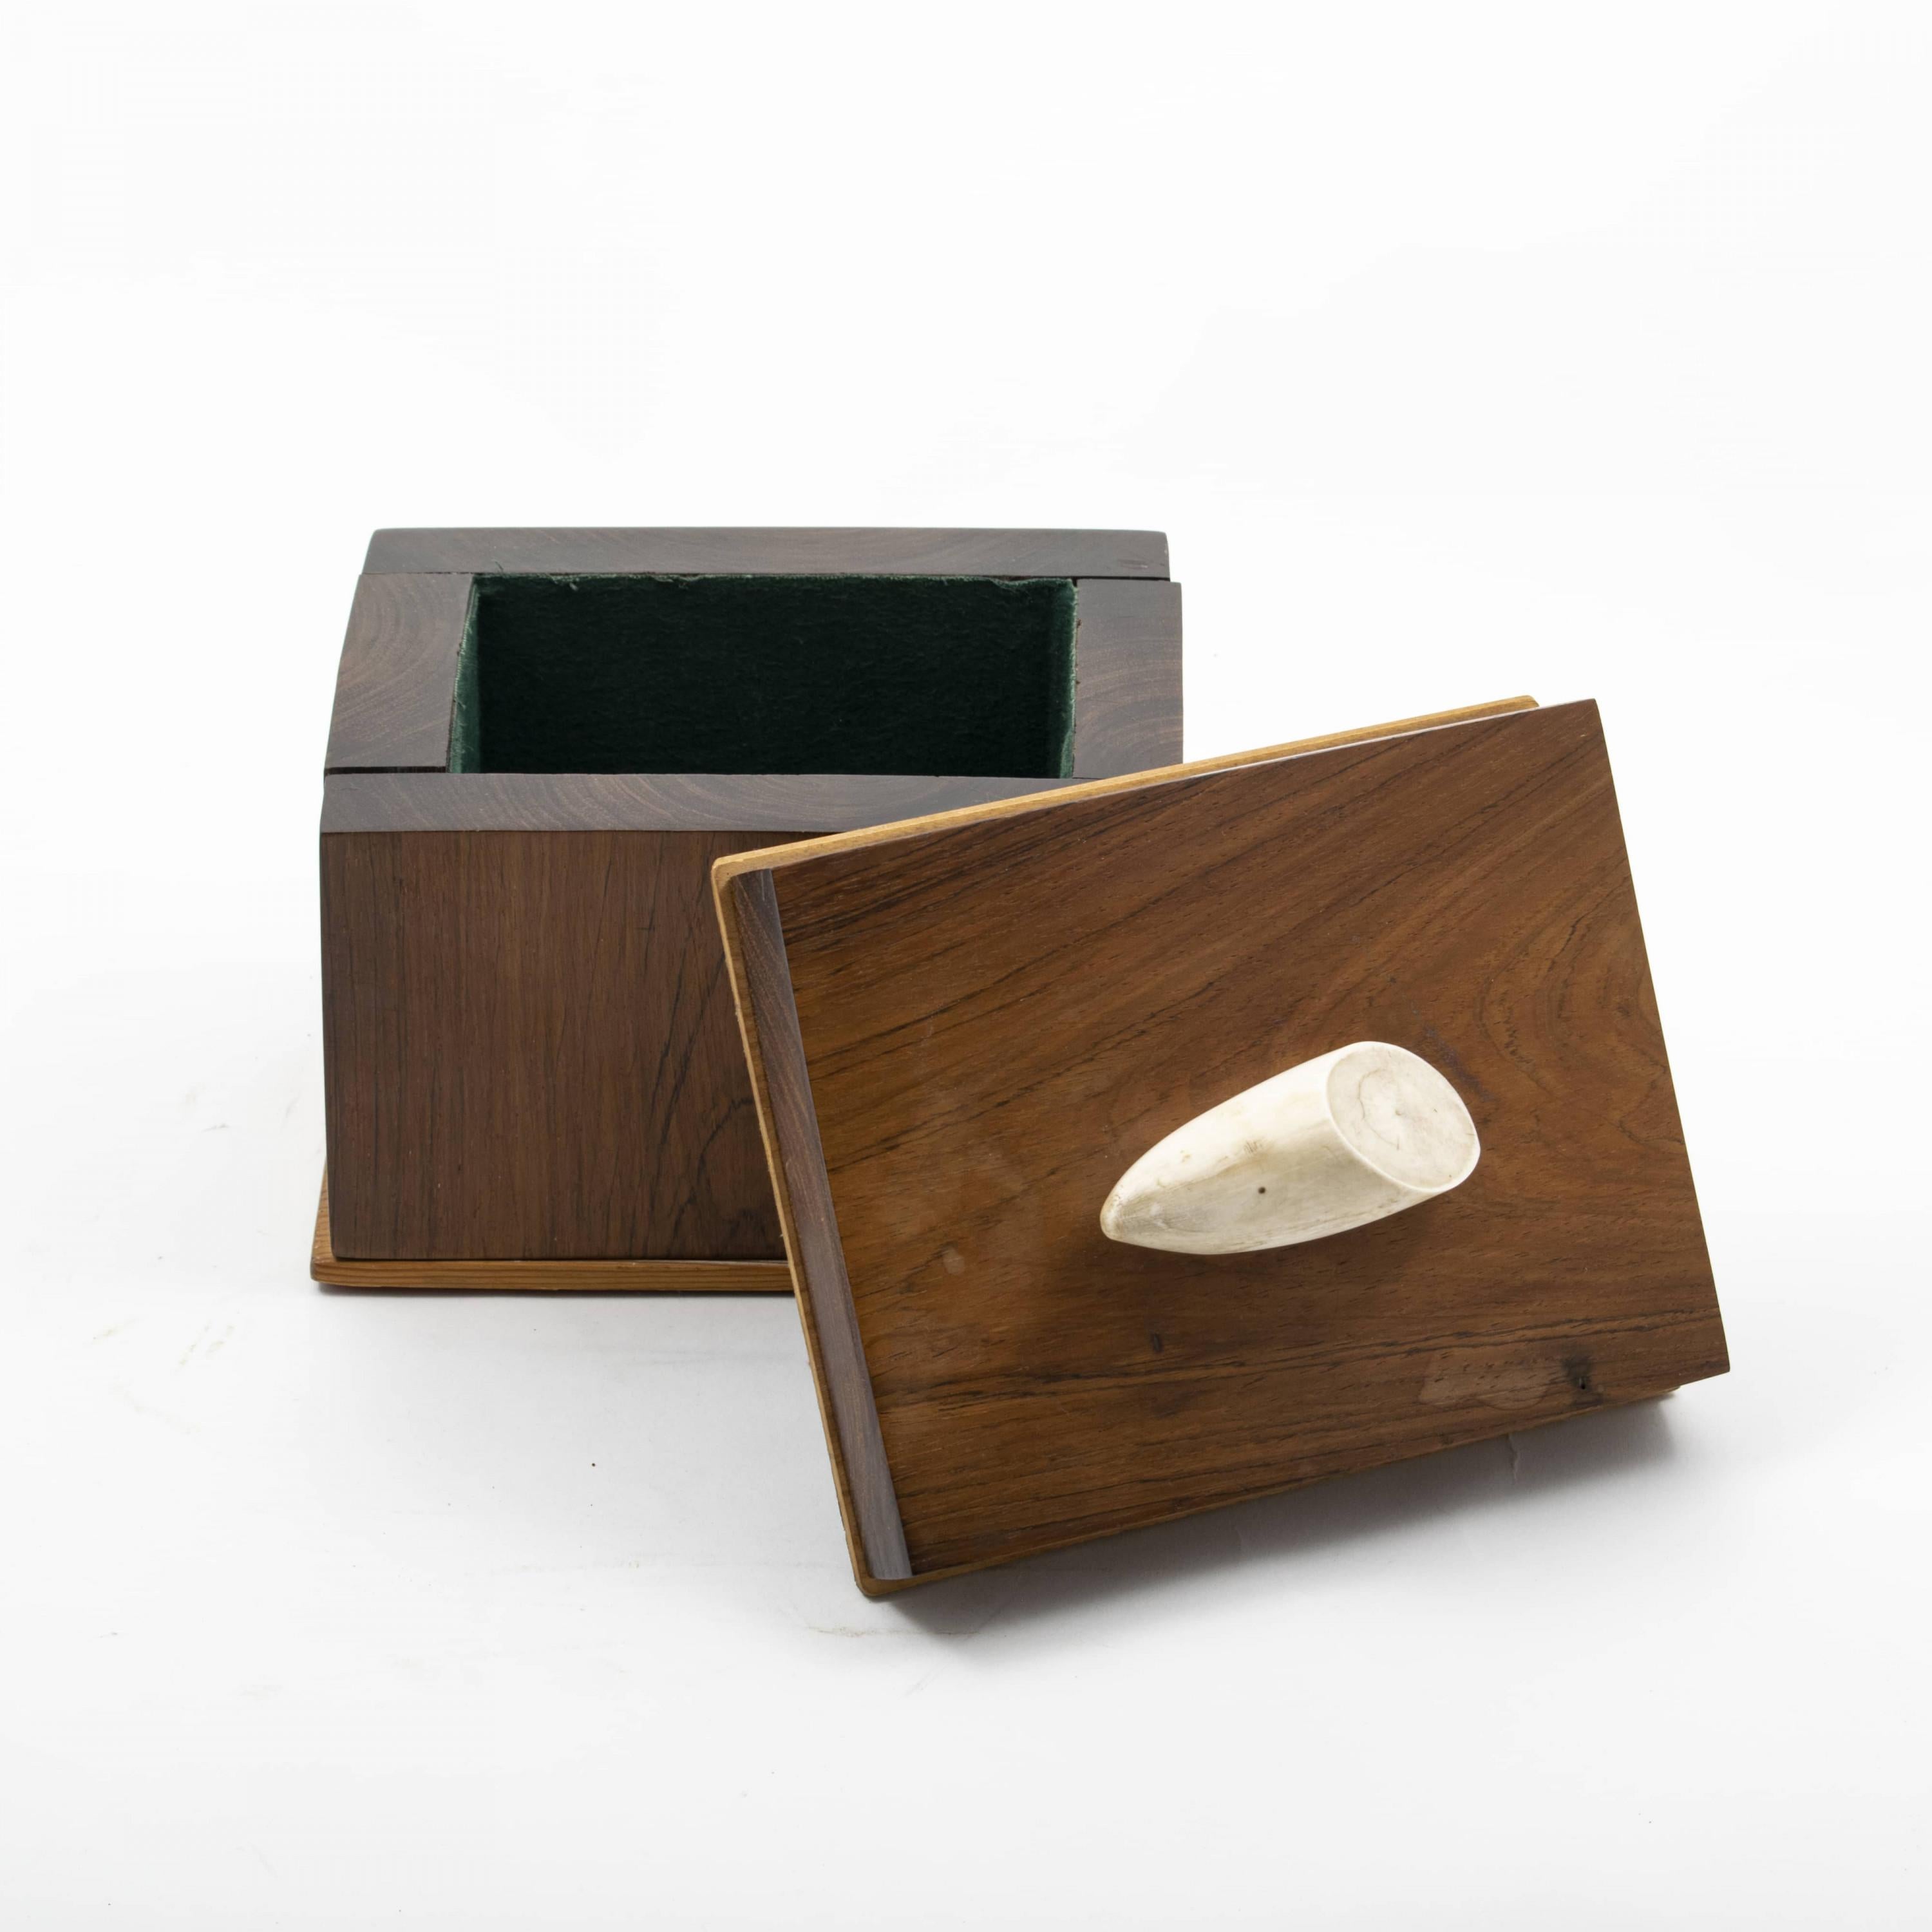 19th Century Danish Late Empire Tobacco Box in Nobel Wood, Lid with Walrus Tooth For Sale